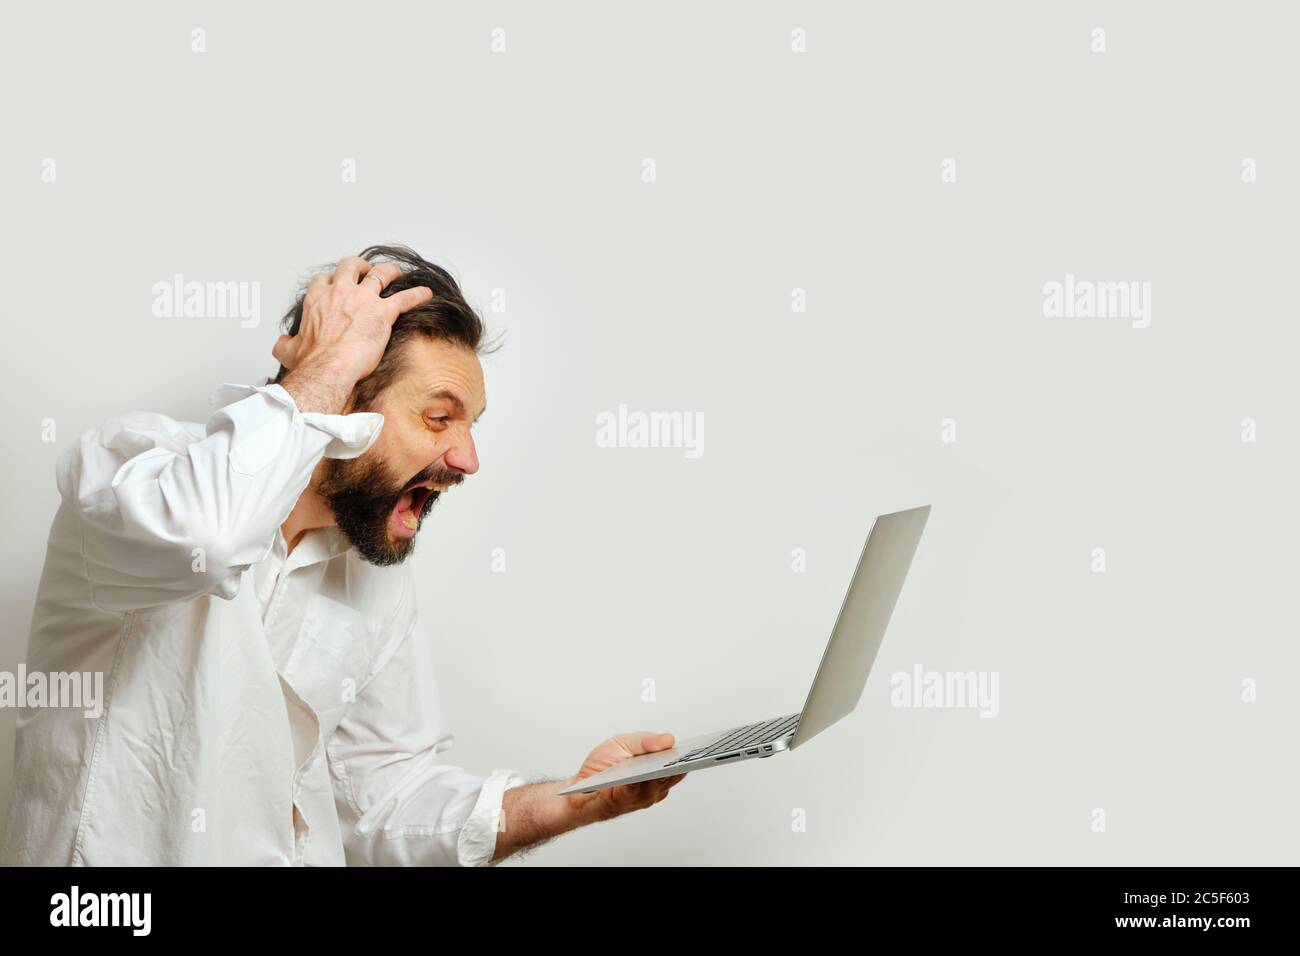 man clutching his head and looking in despair at a laptop monitor Isolated on a white background. The concept of emotions and financial crisis. Stock Photo